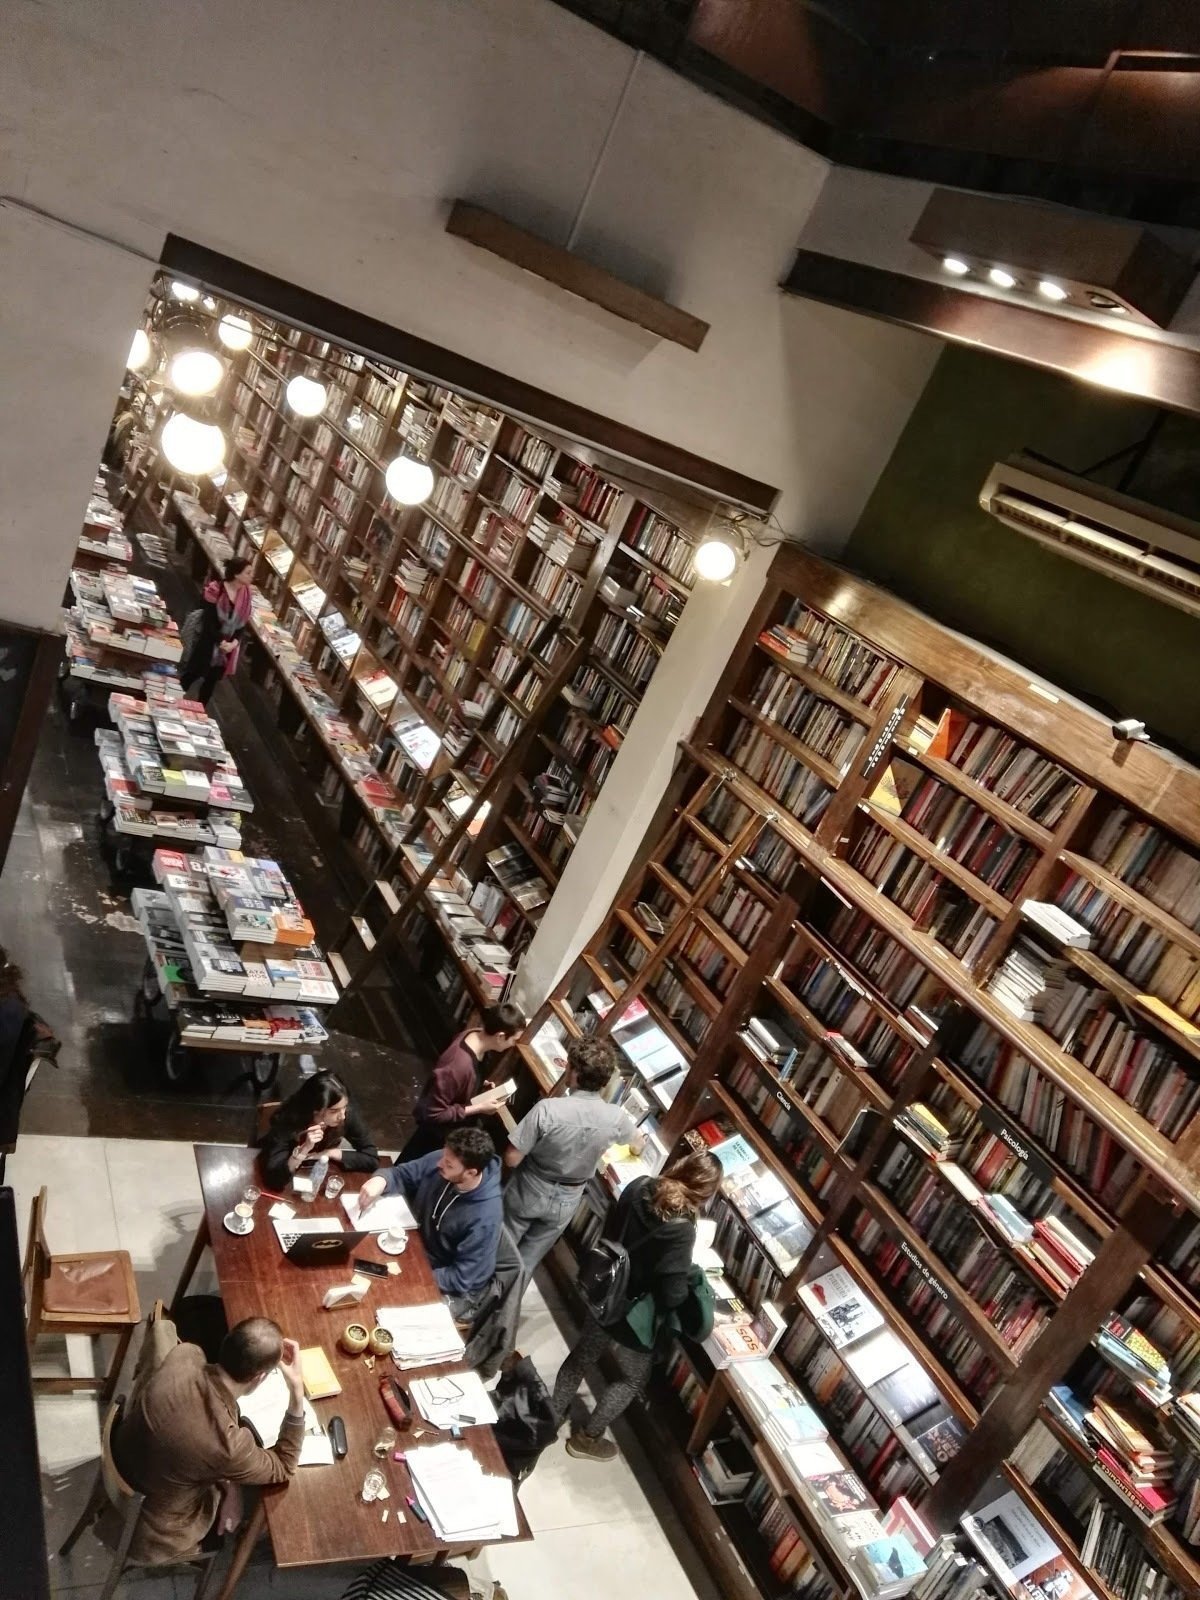 <span class="translation_missing" title="translation missing: en.meta.location_title, location_name: Libros del Pasaje, city: Buenos Aires">Location Title</span>